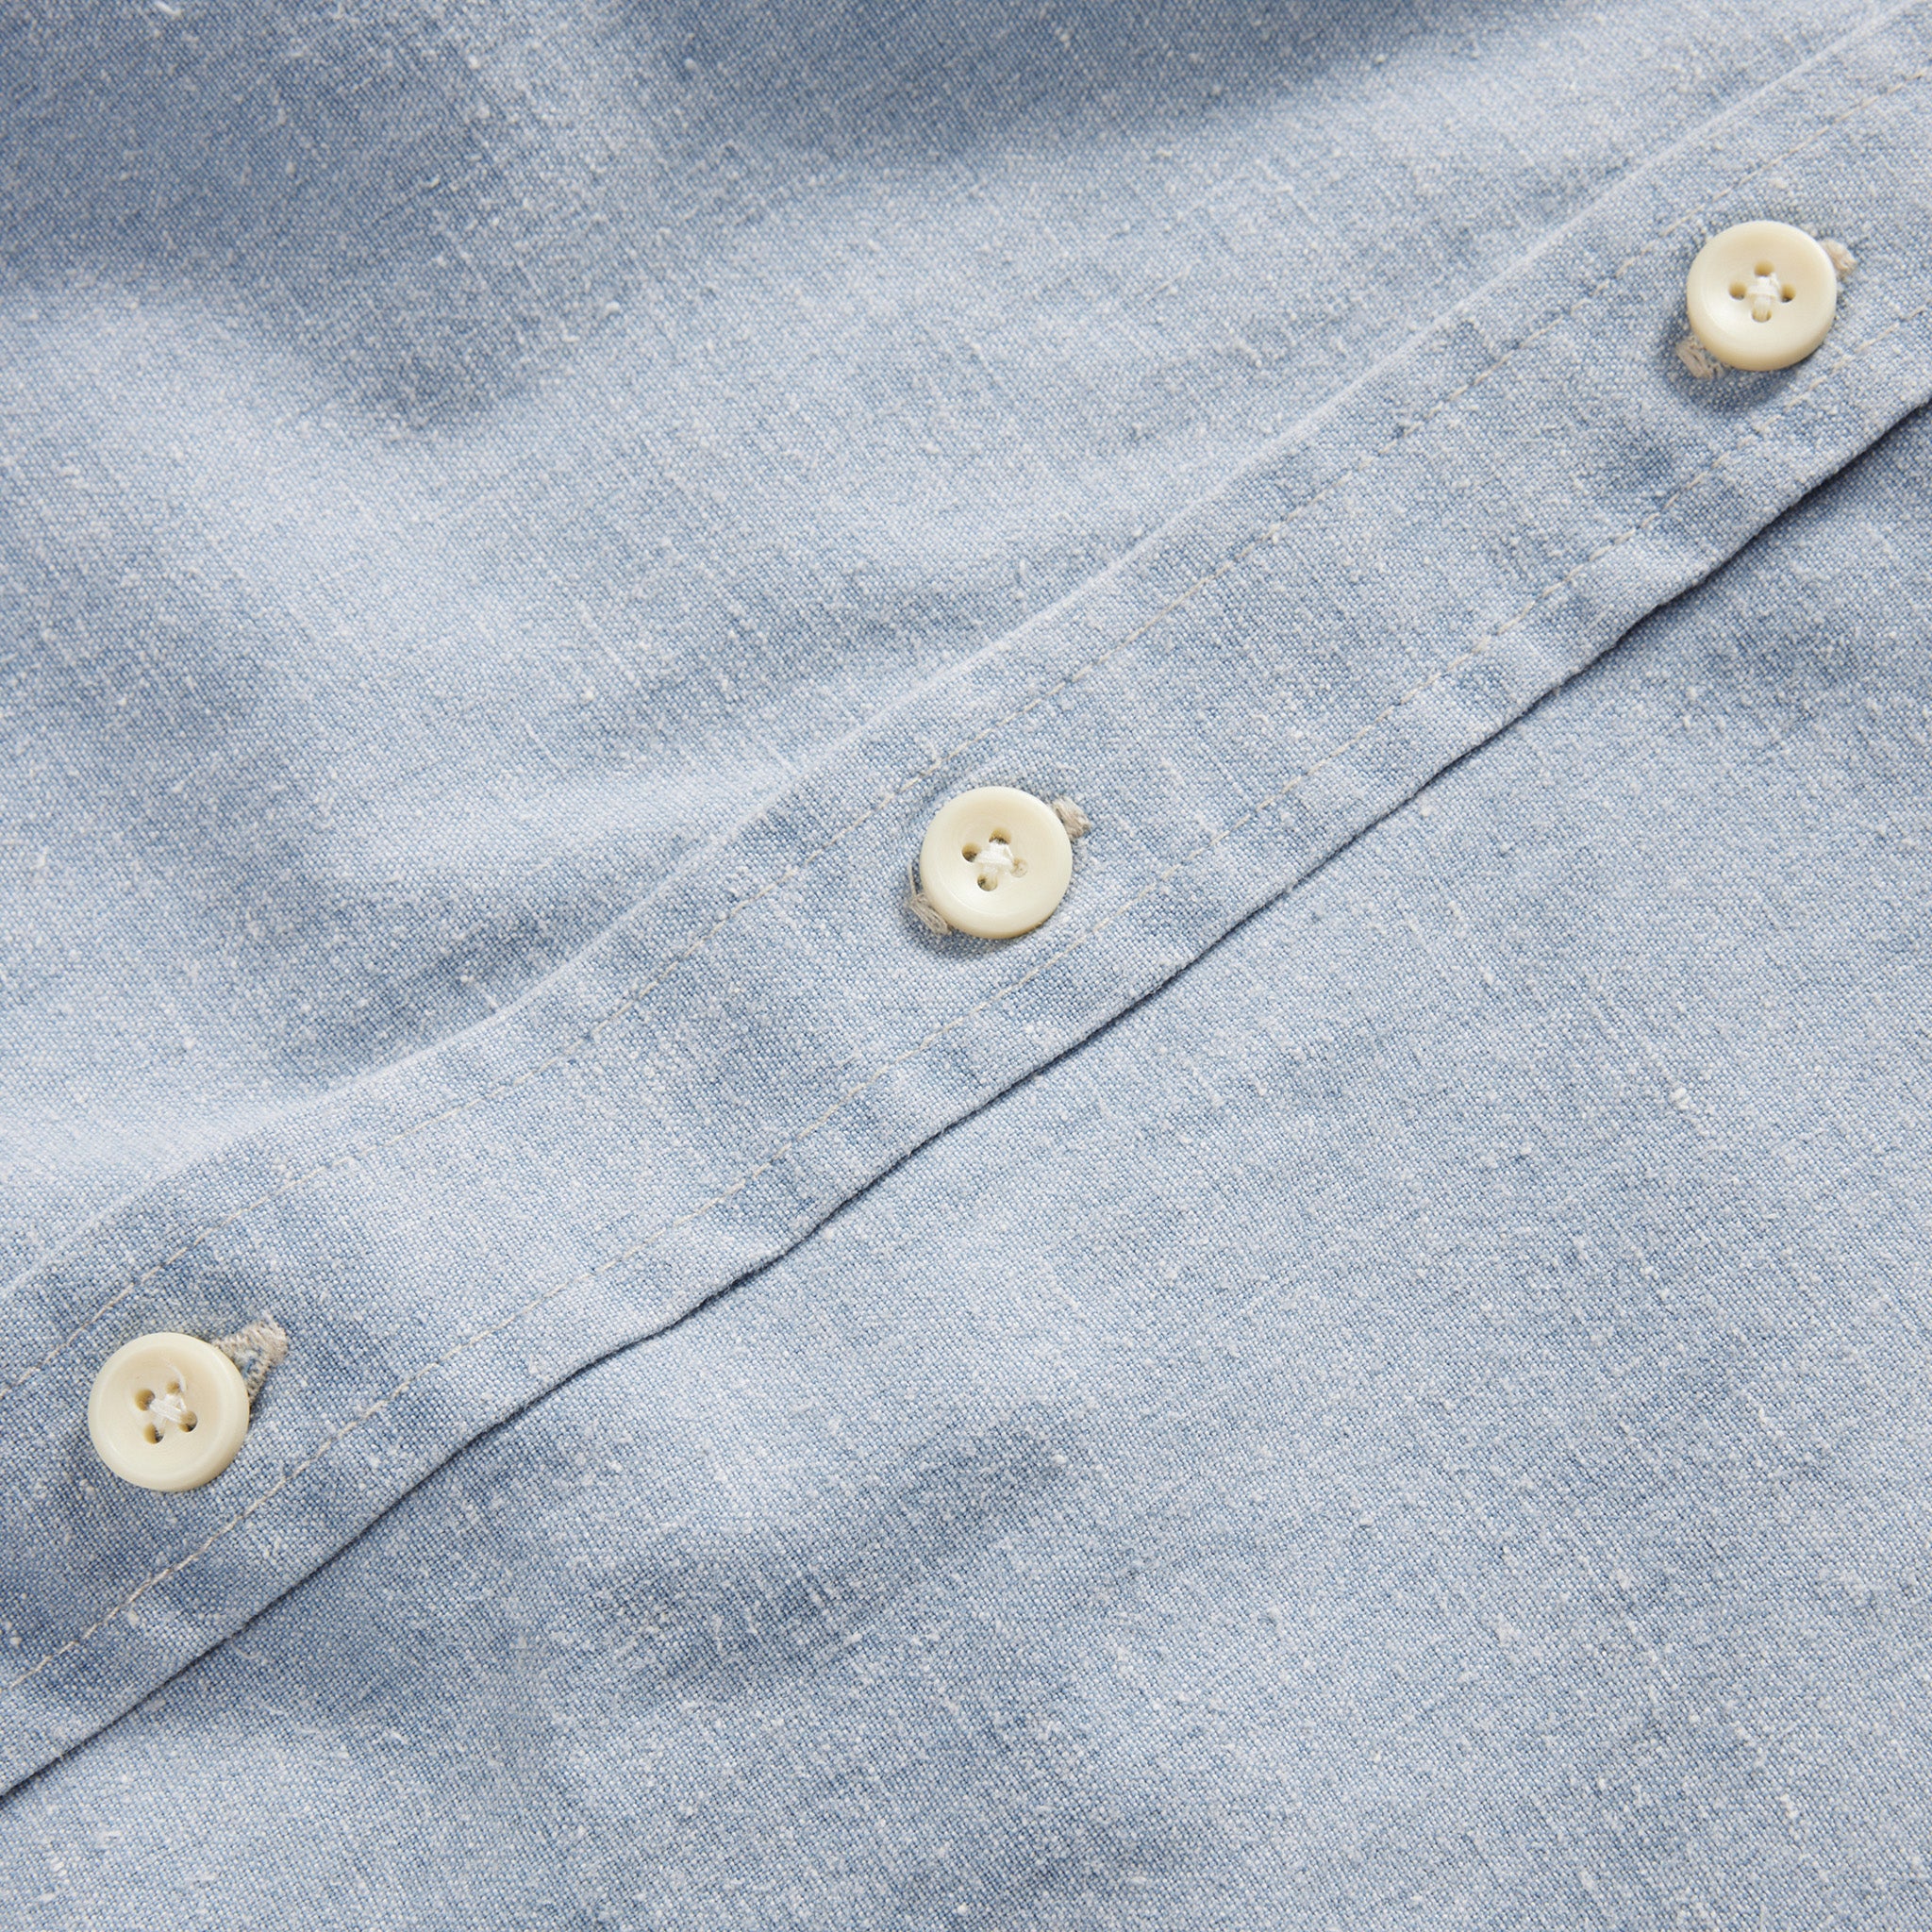 The Utility Shirt in Washed Indigo Boss Duck